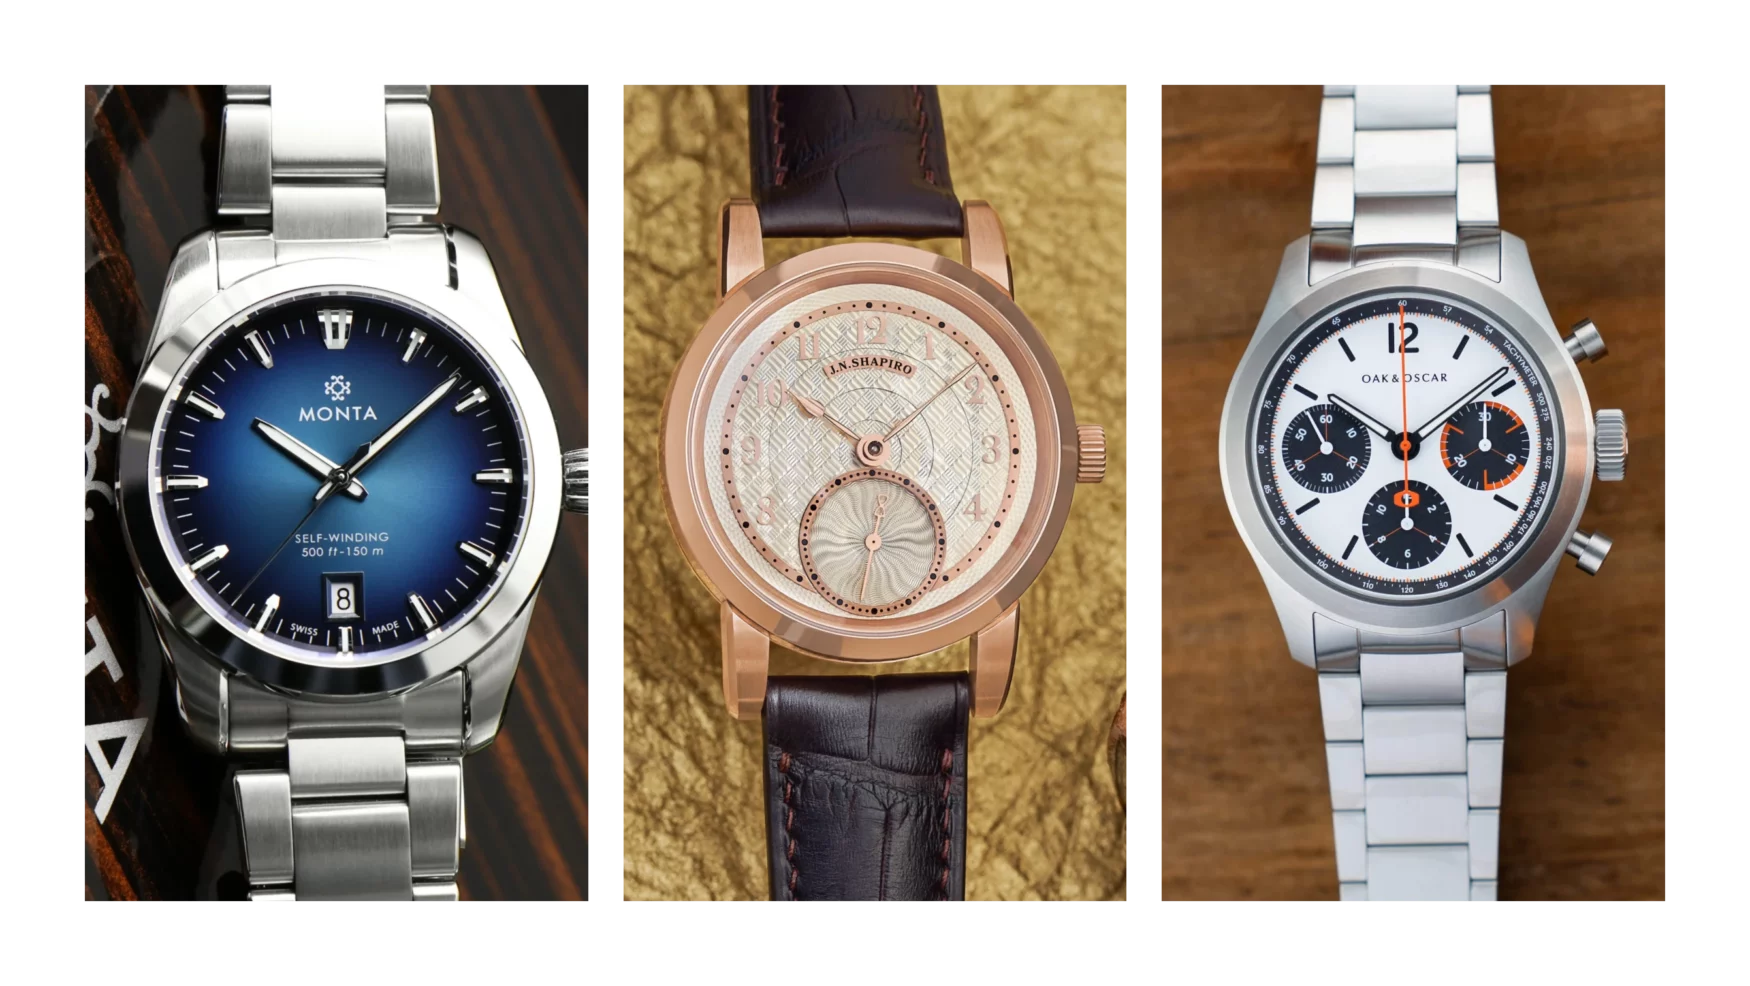 10 of the best American watch brands from least to most expensive